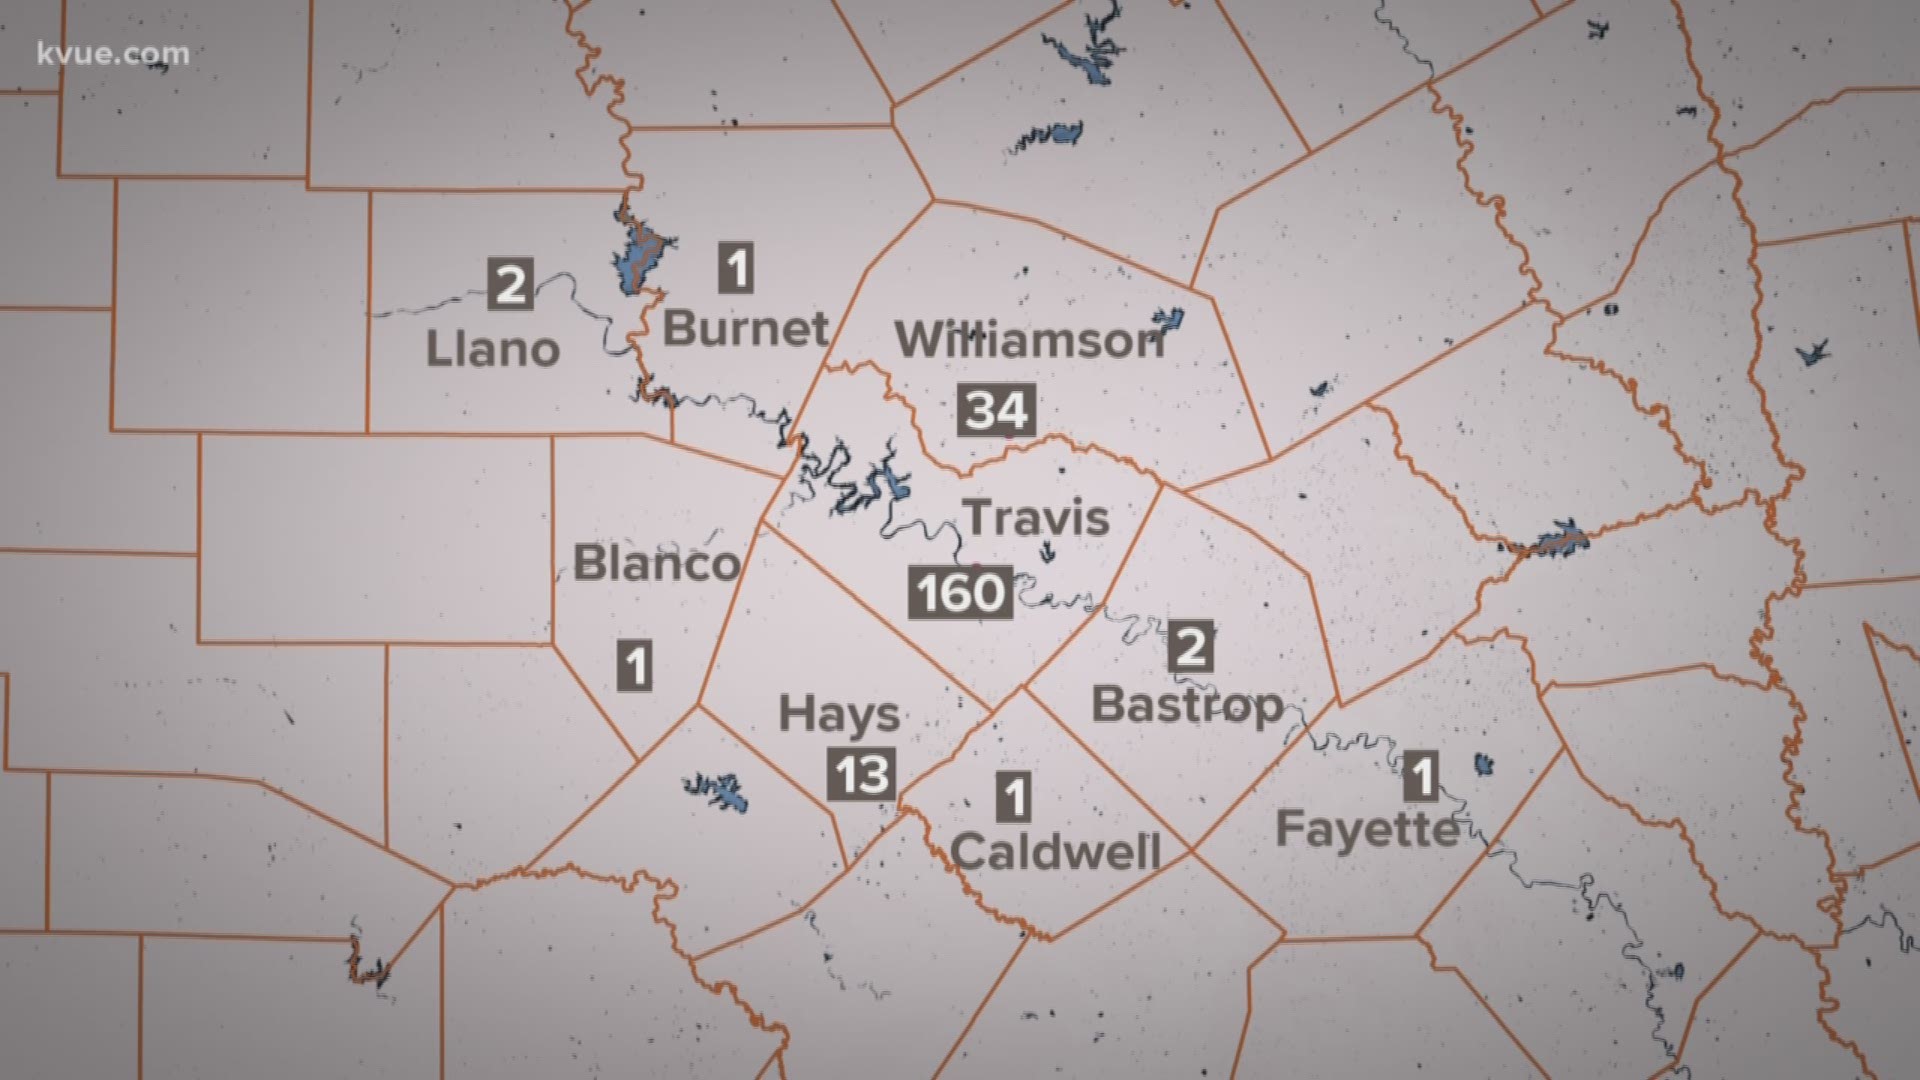 Travis County now has 160 cases of COVID-19 and one death.